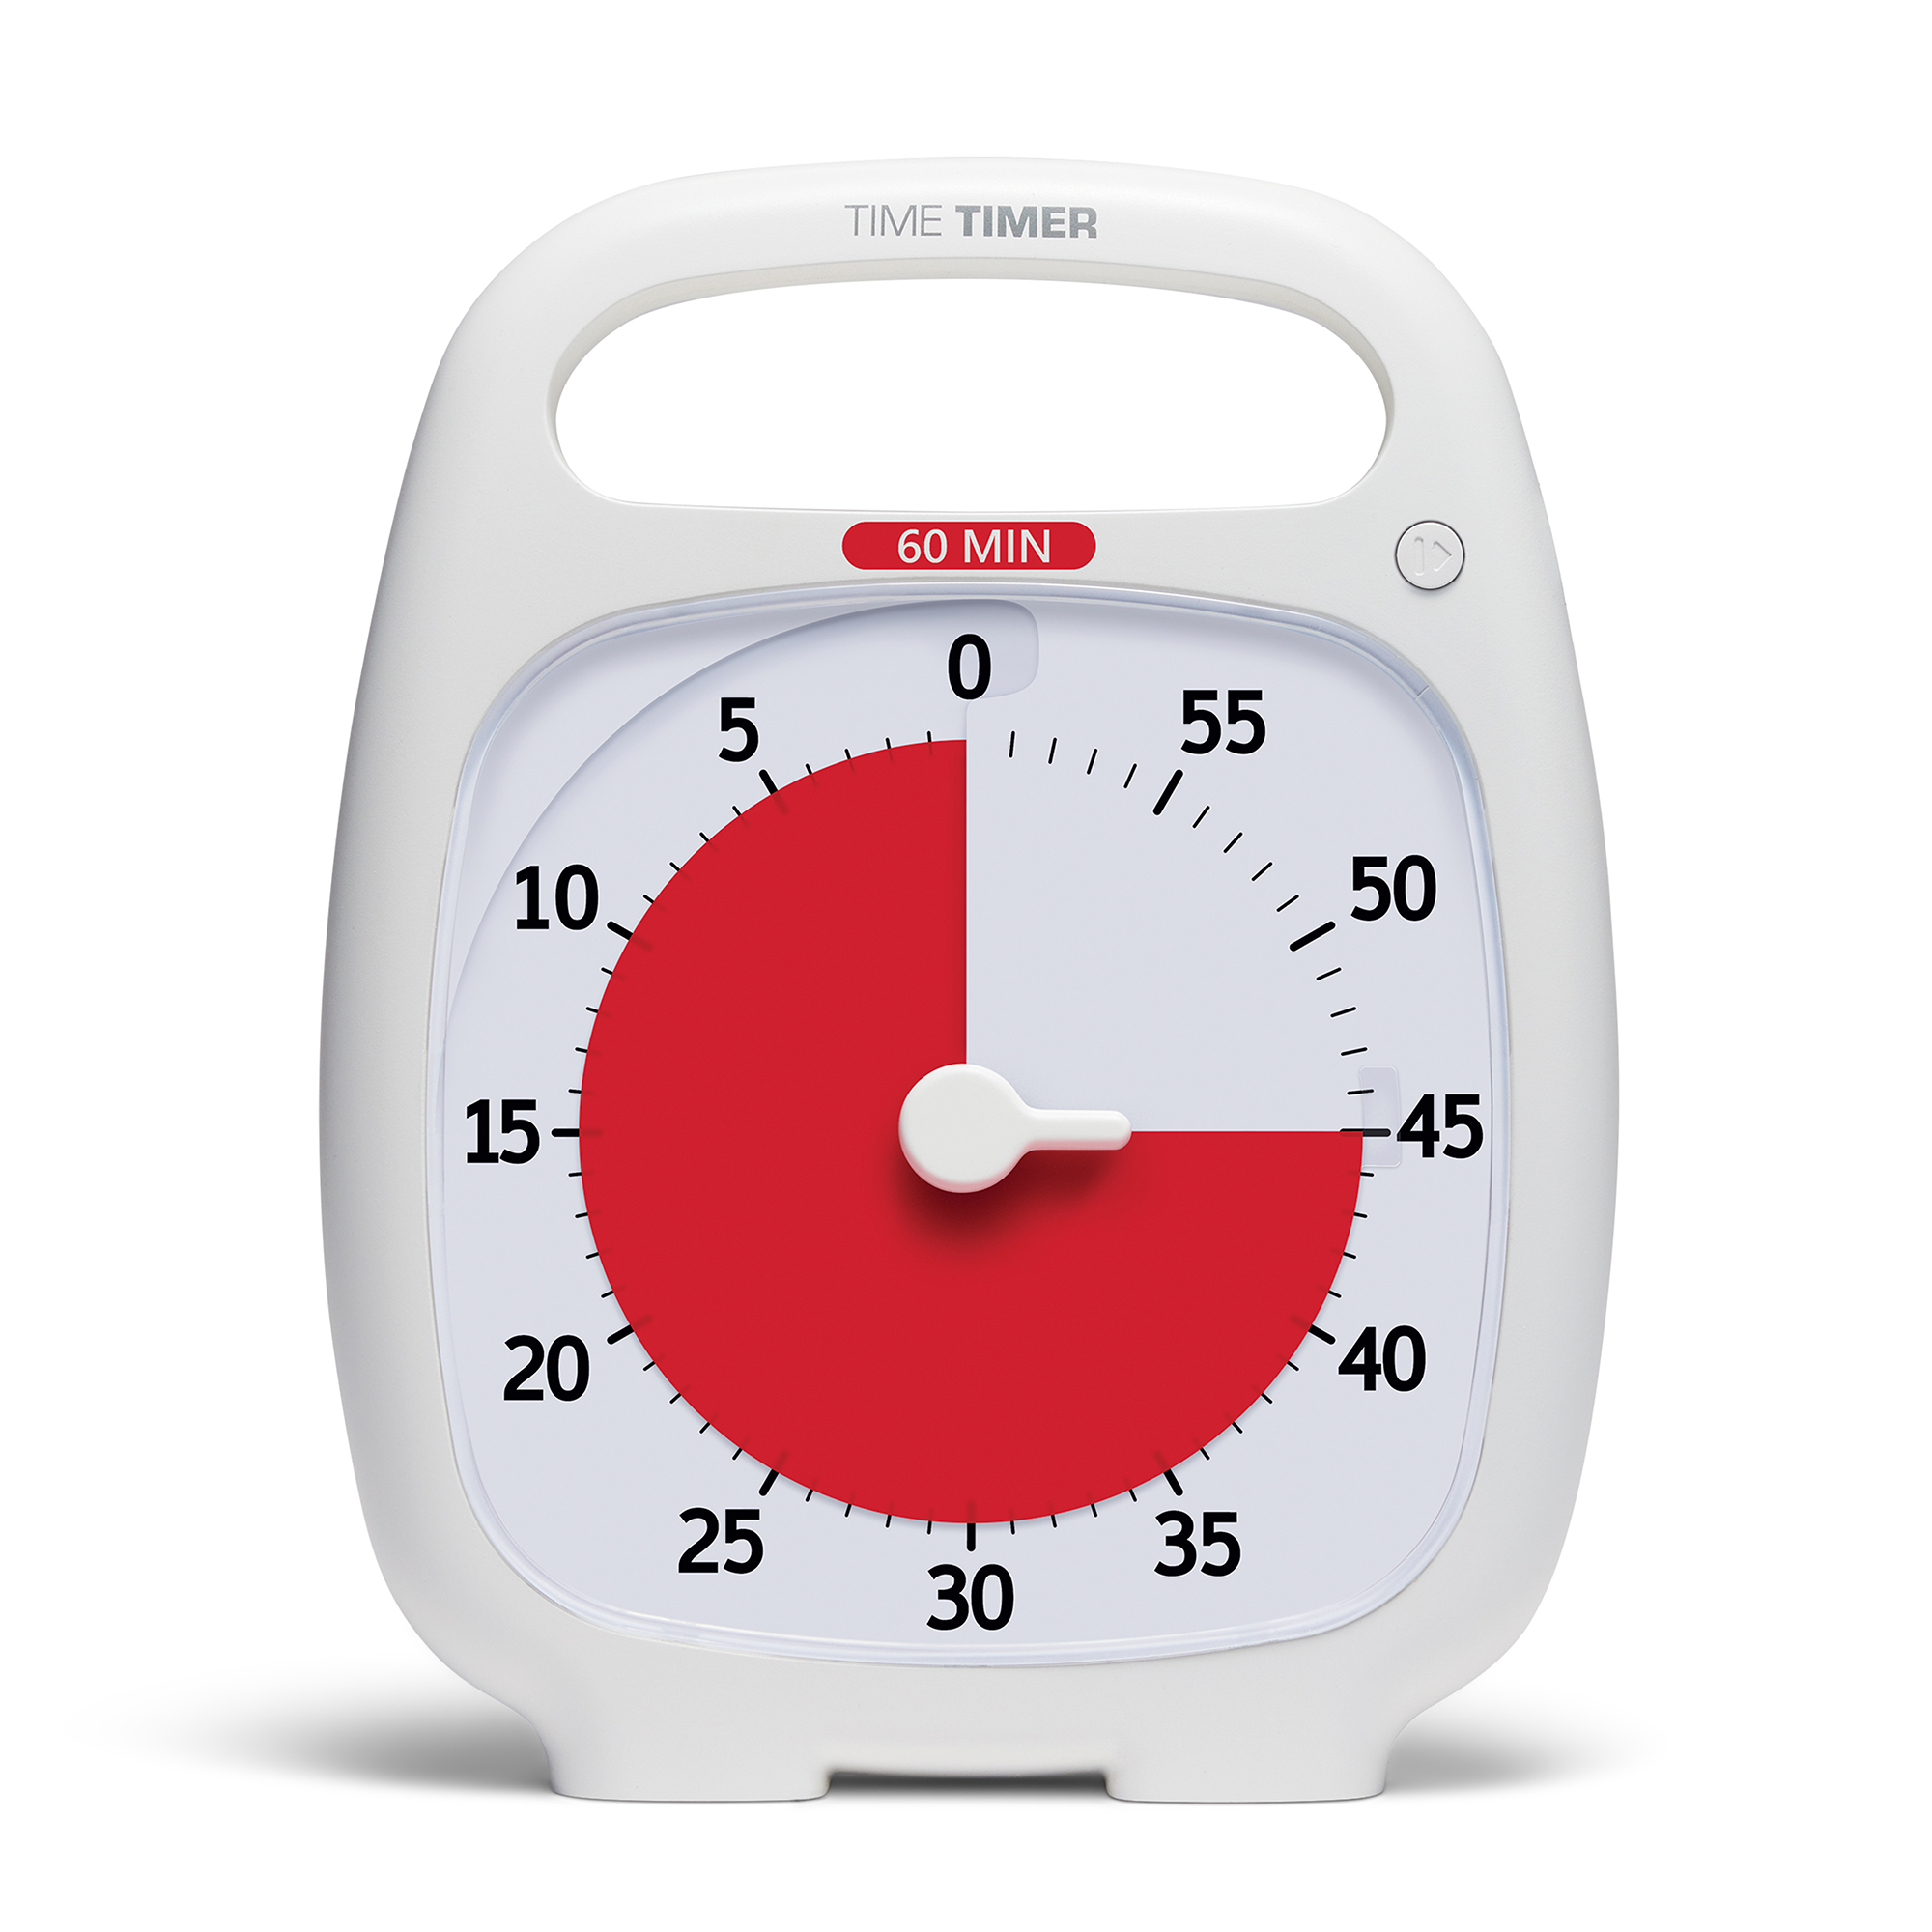 60-Minute Visual Timer- Clock Timer for Kids perfect Time